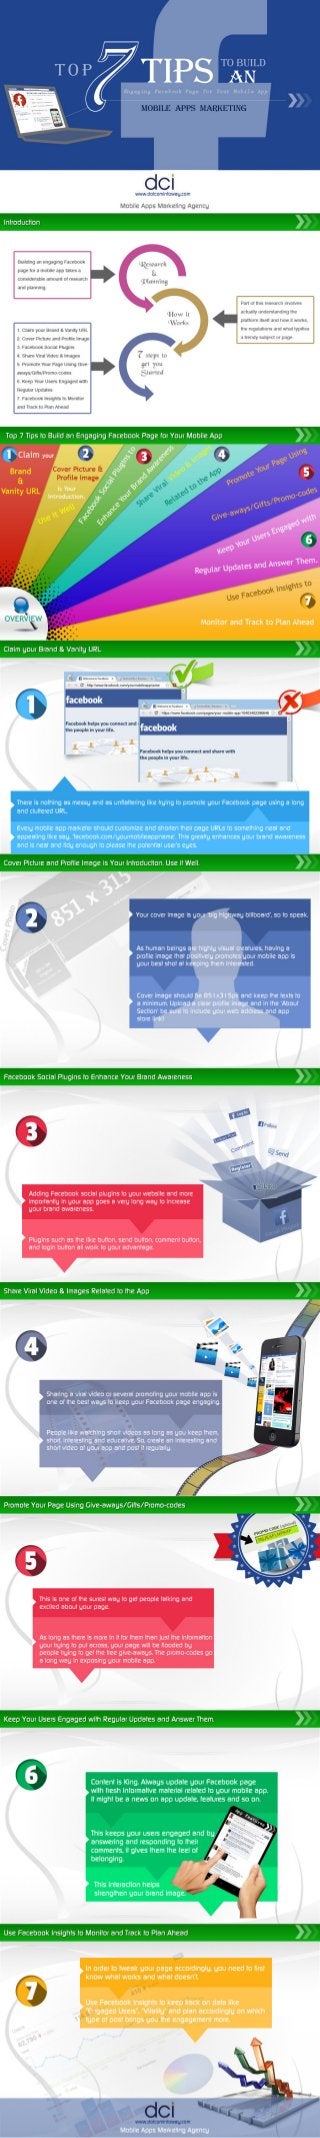 Mobile App Marketing - Top 7 Tips to Build an Engaging Facebook Page for Mobile App